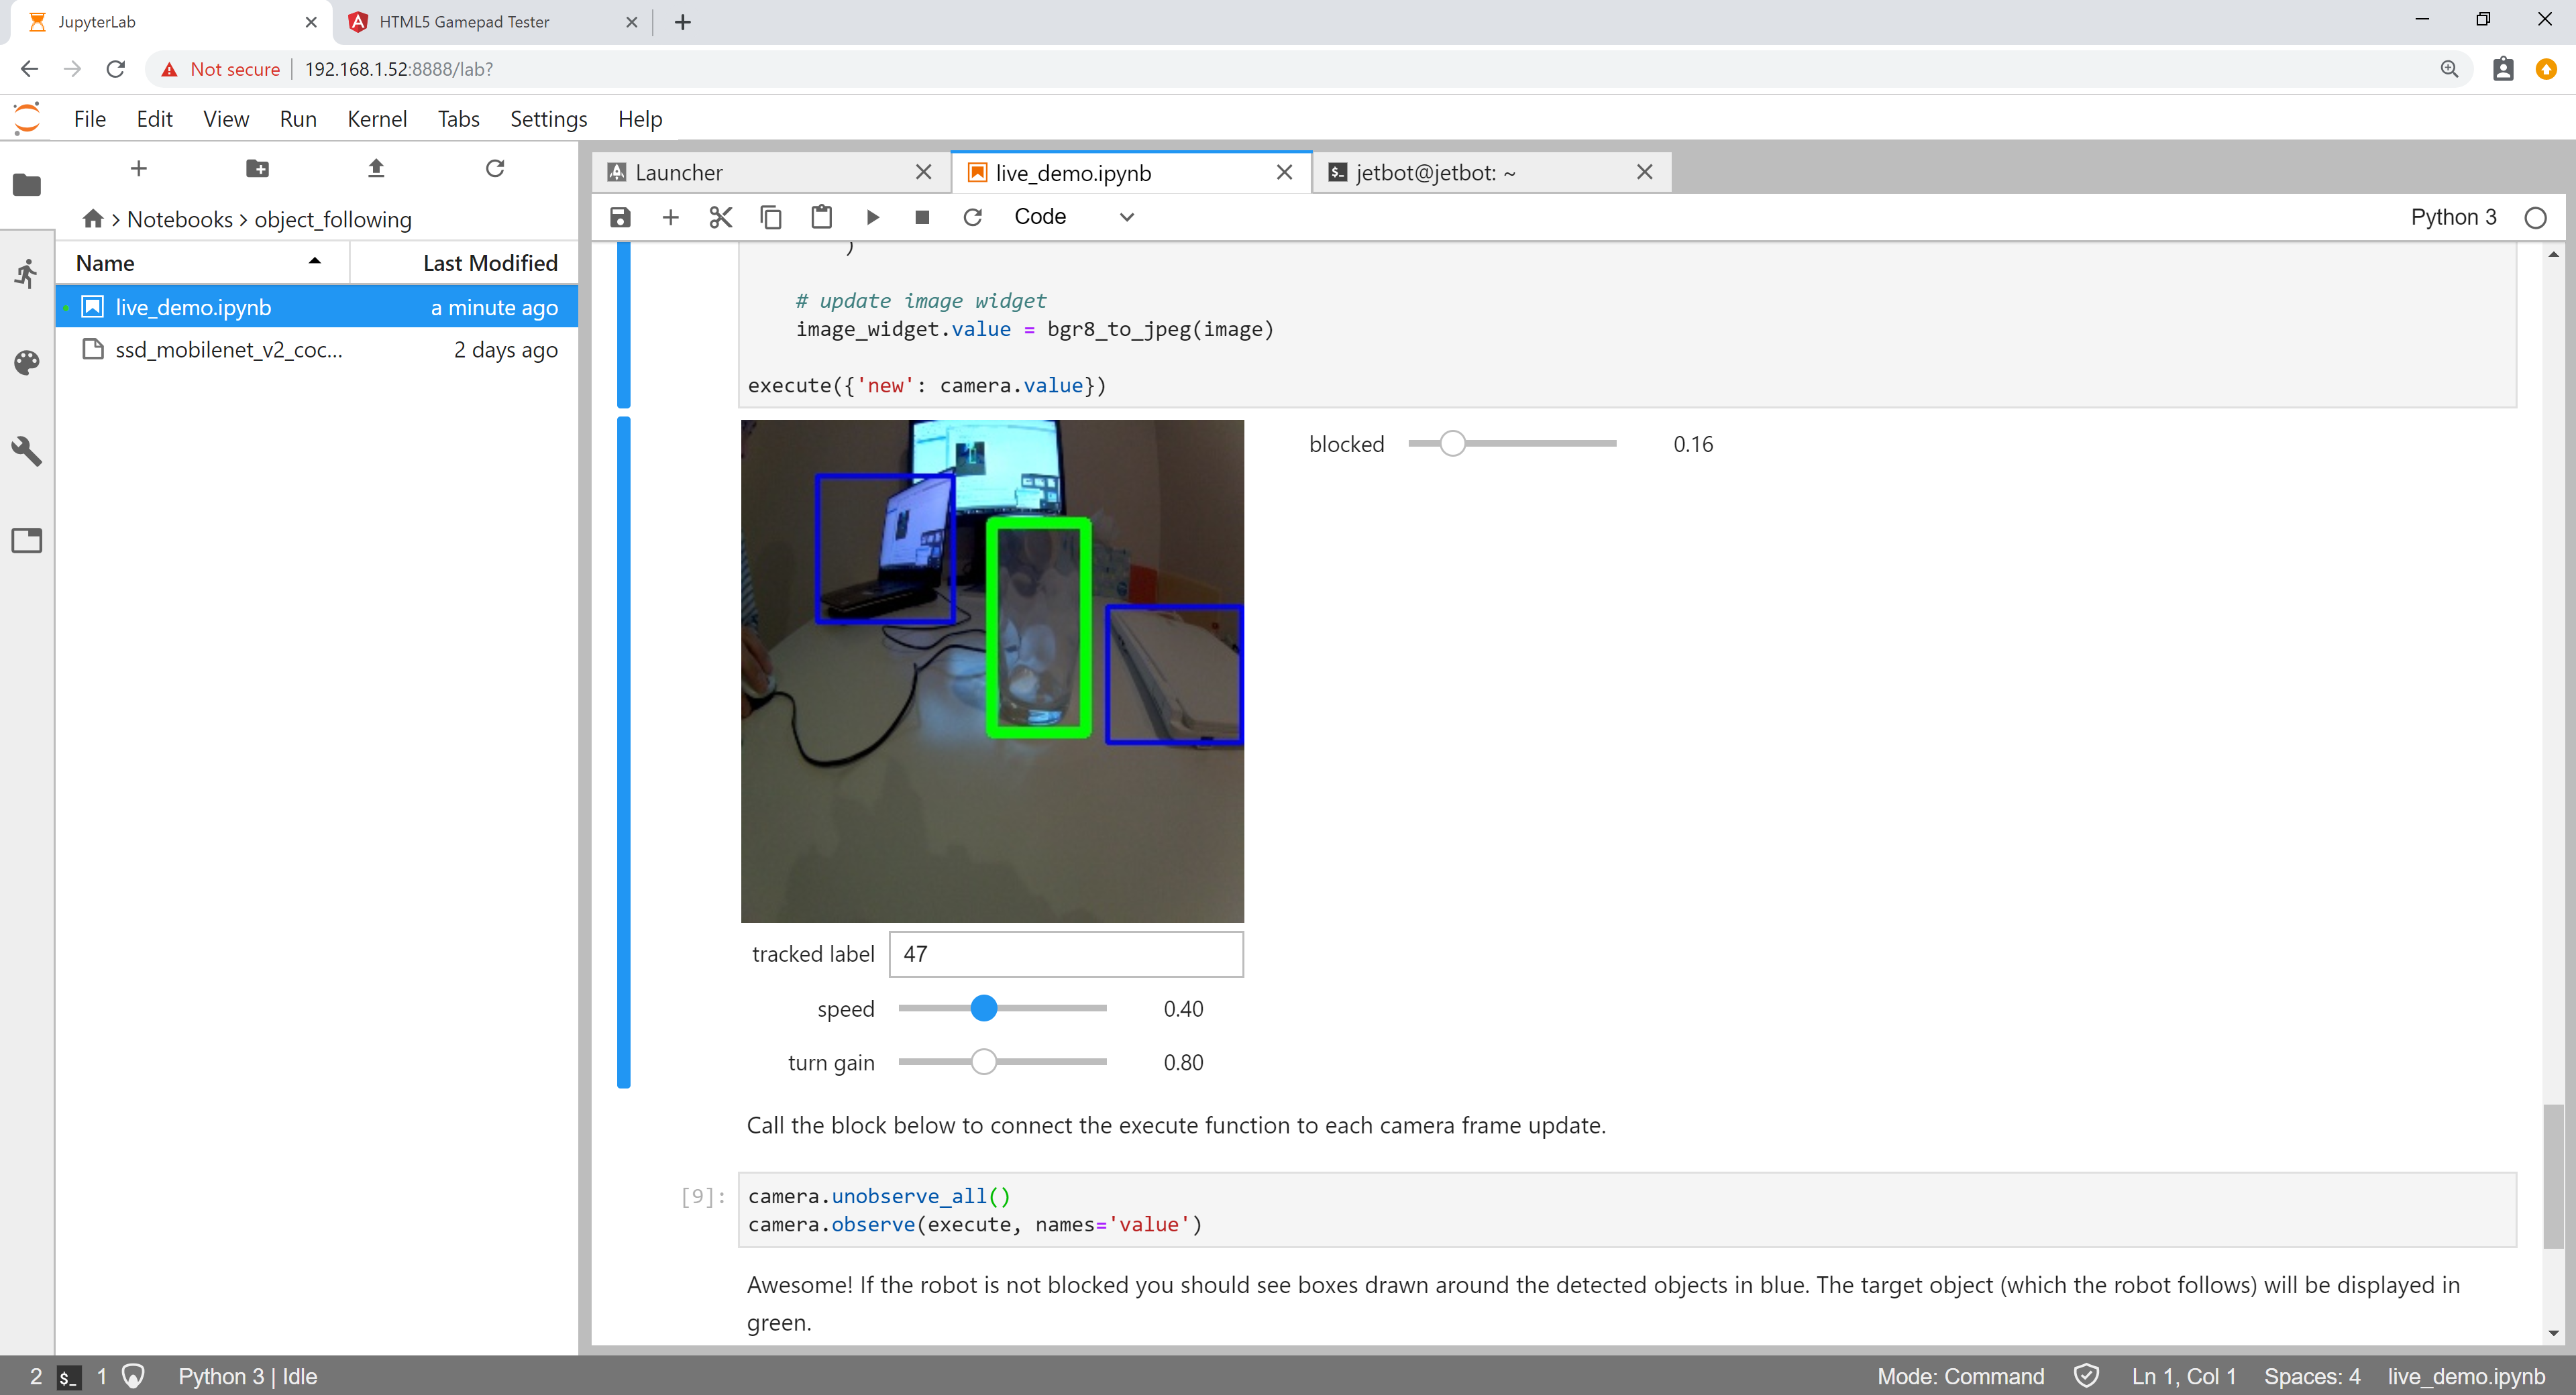 https://github.com/NVIDIA-AI-IOT/jetbot/wiki/images/JL04_Object-Following.png